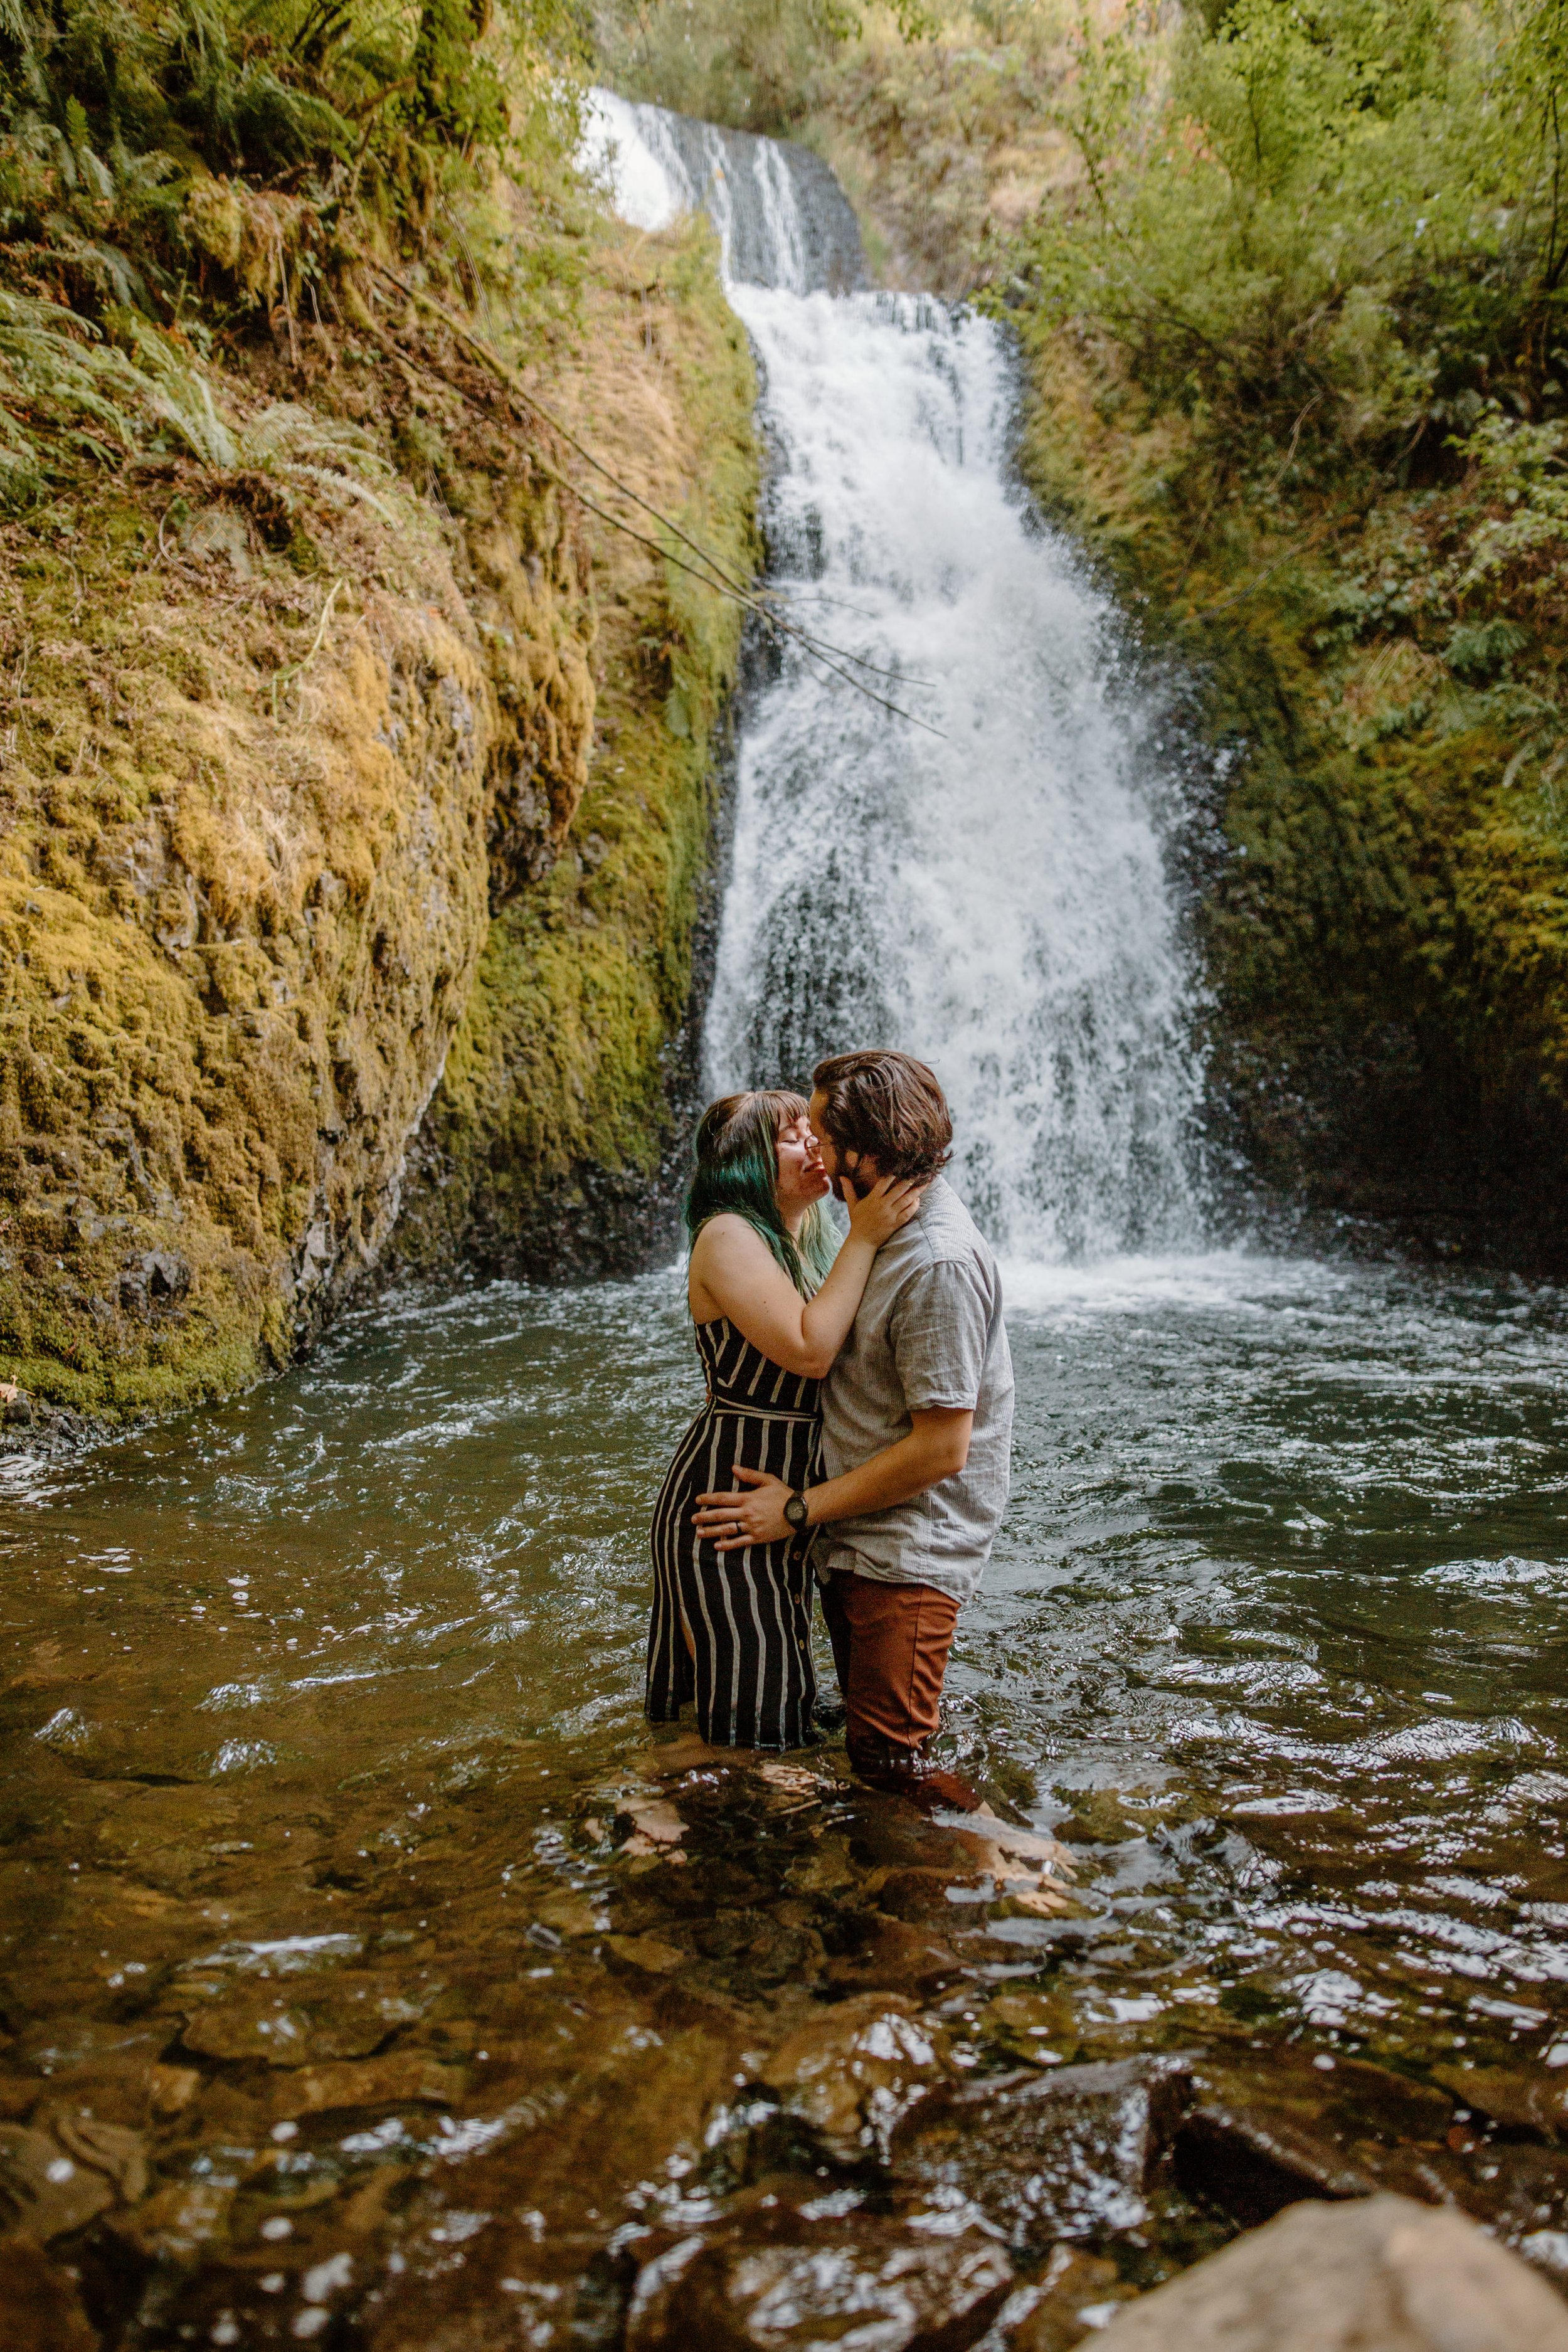  Couple kisses in the water in front of Bridal Veil Falls in the Columbia River Gorge near Portland Oregon 